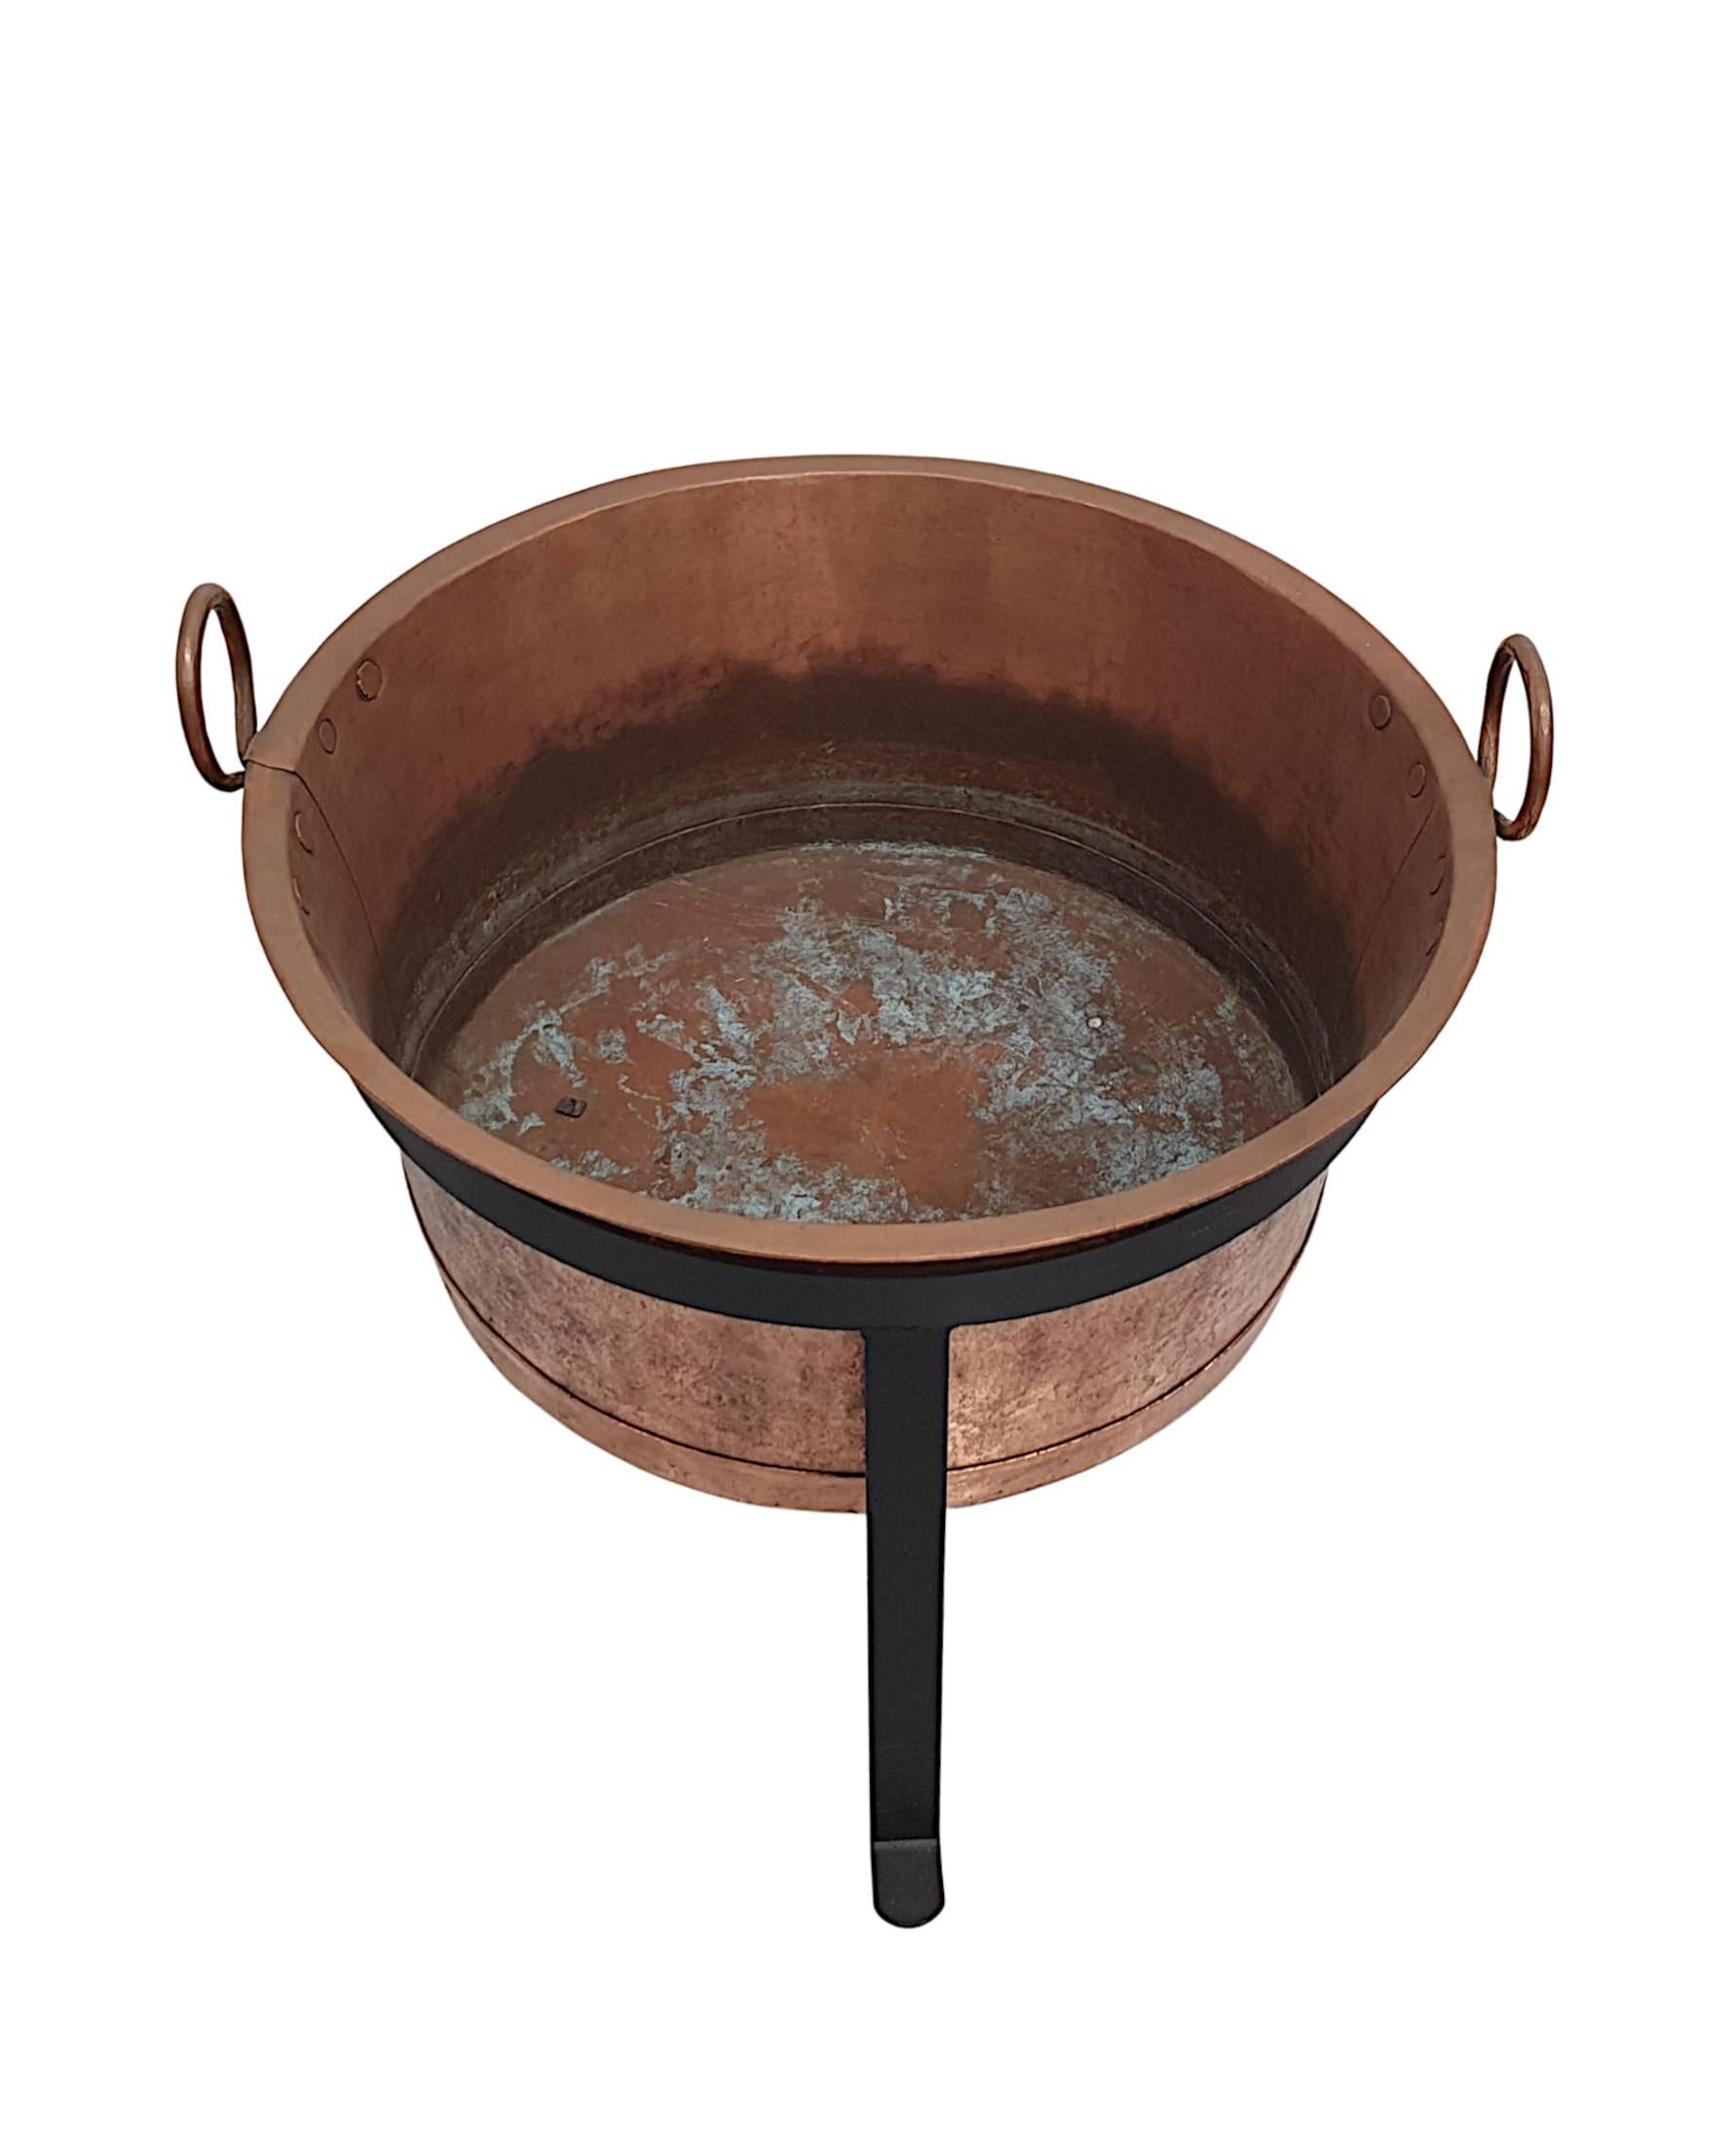 A very rare 19th Century copper log bucket of large proportions.  The finely crafted body of oval form with a gorgeous patina, everted rim and loop handles is supported on a lovely new handmade black metal stand.

Bucket on Stand Width: 30 in / 76 cm